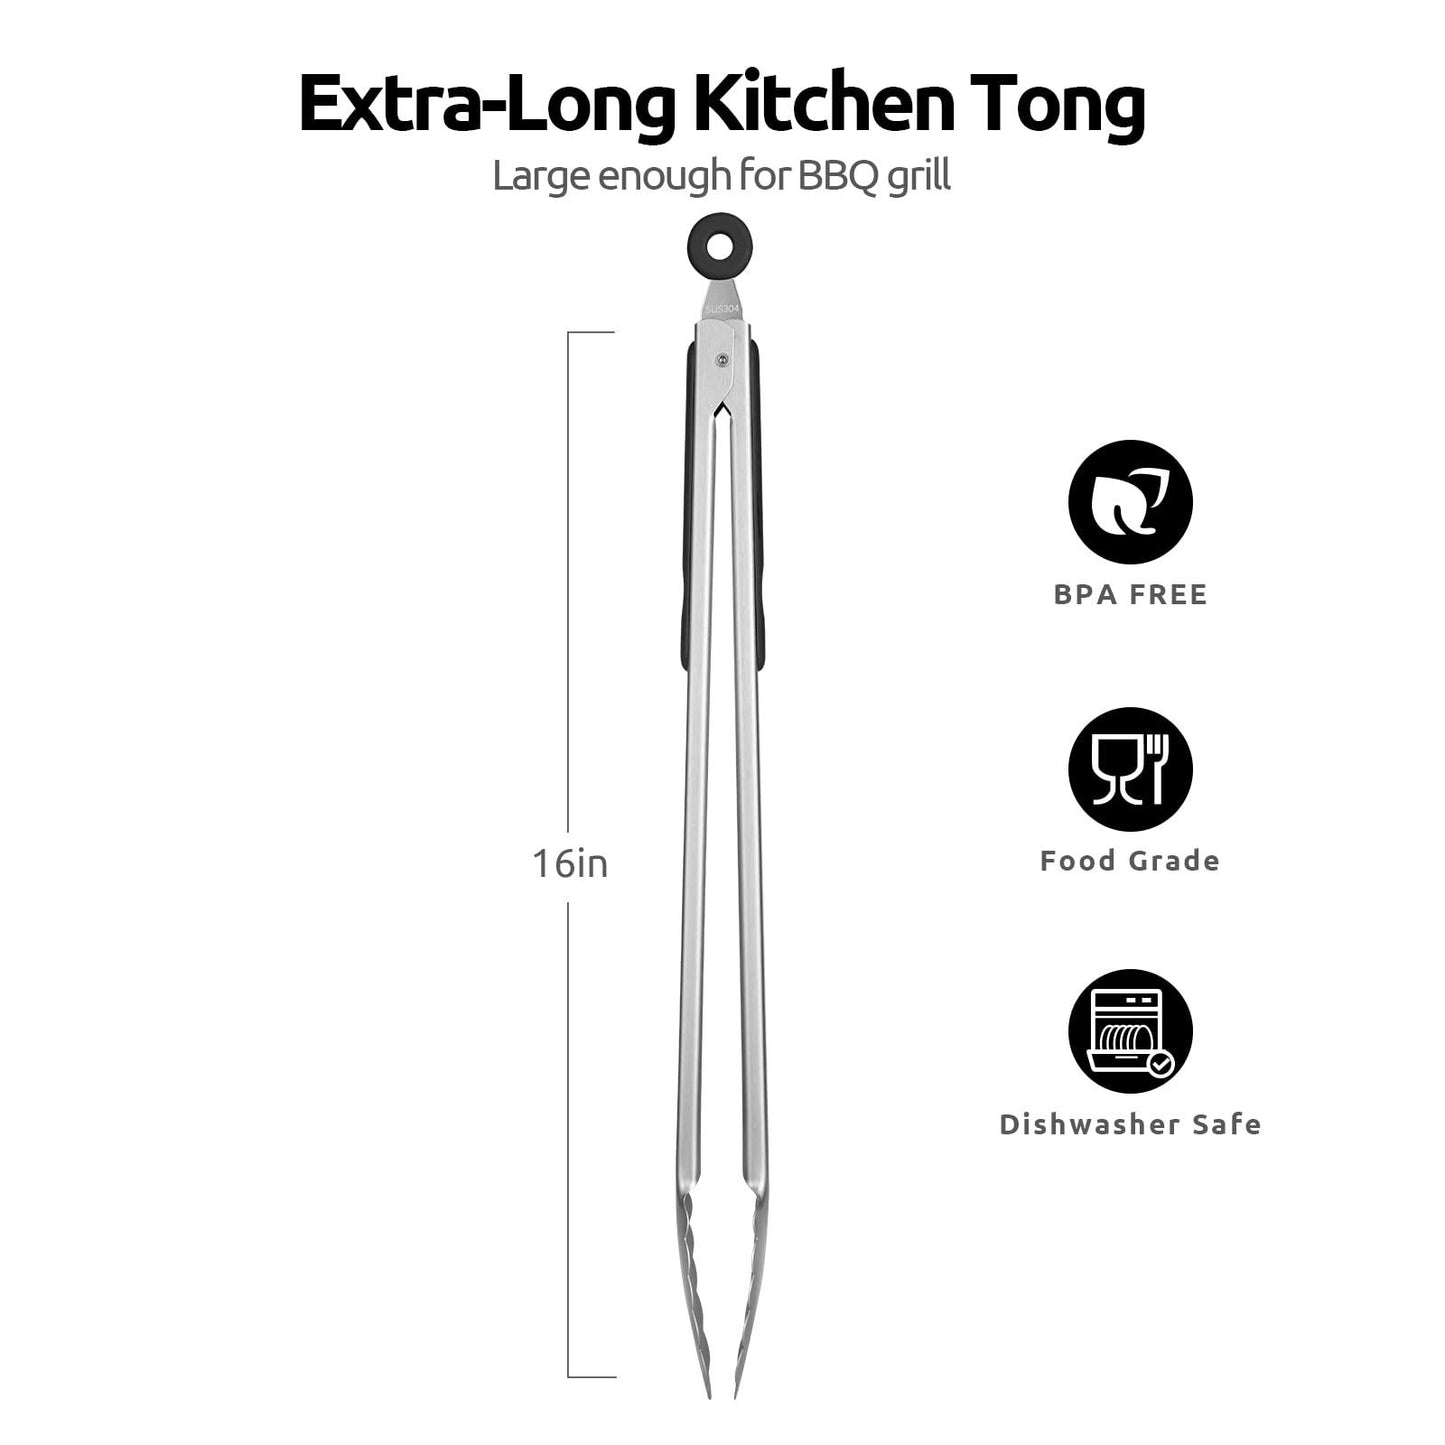 18/8 Stainless Steel Kitchen Tong: U-Taste 16 inch Extra Long Large Heat Resistant Cooking Tong with Sturdy Metal Tips & Non Slip Silicone Handle & Smooth Locking for Serving BBQ (Black) - CookCave